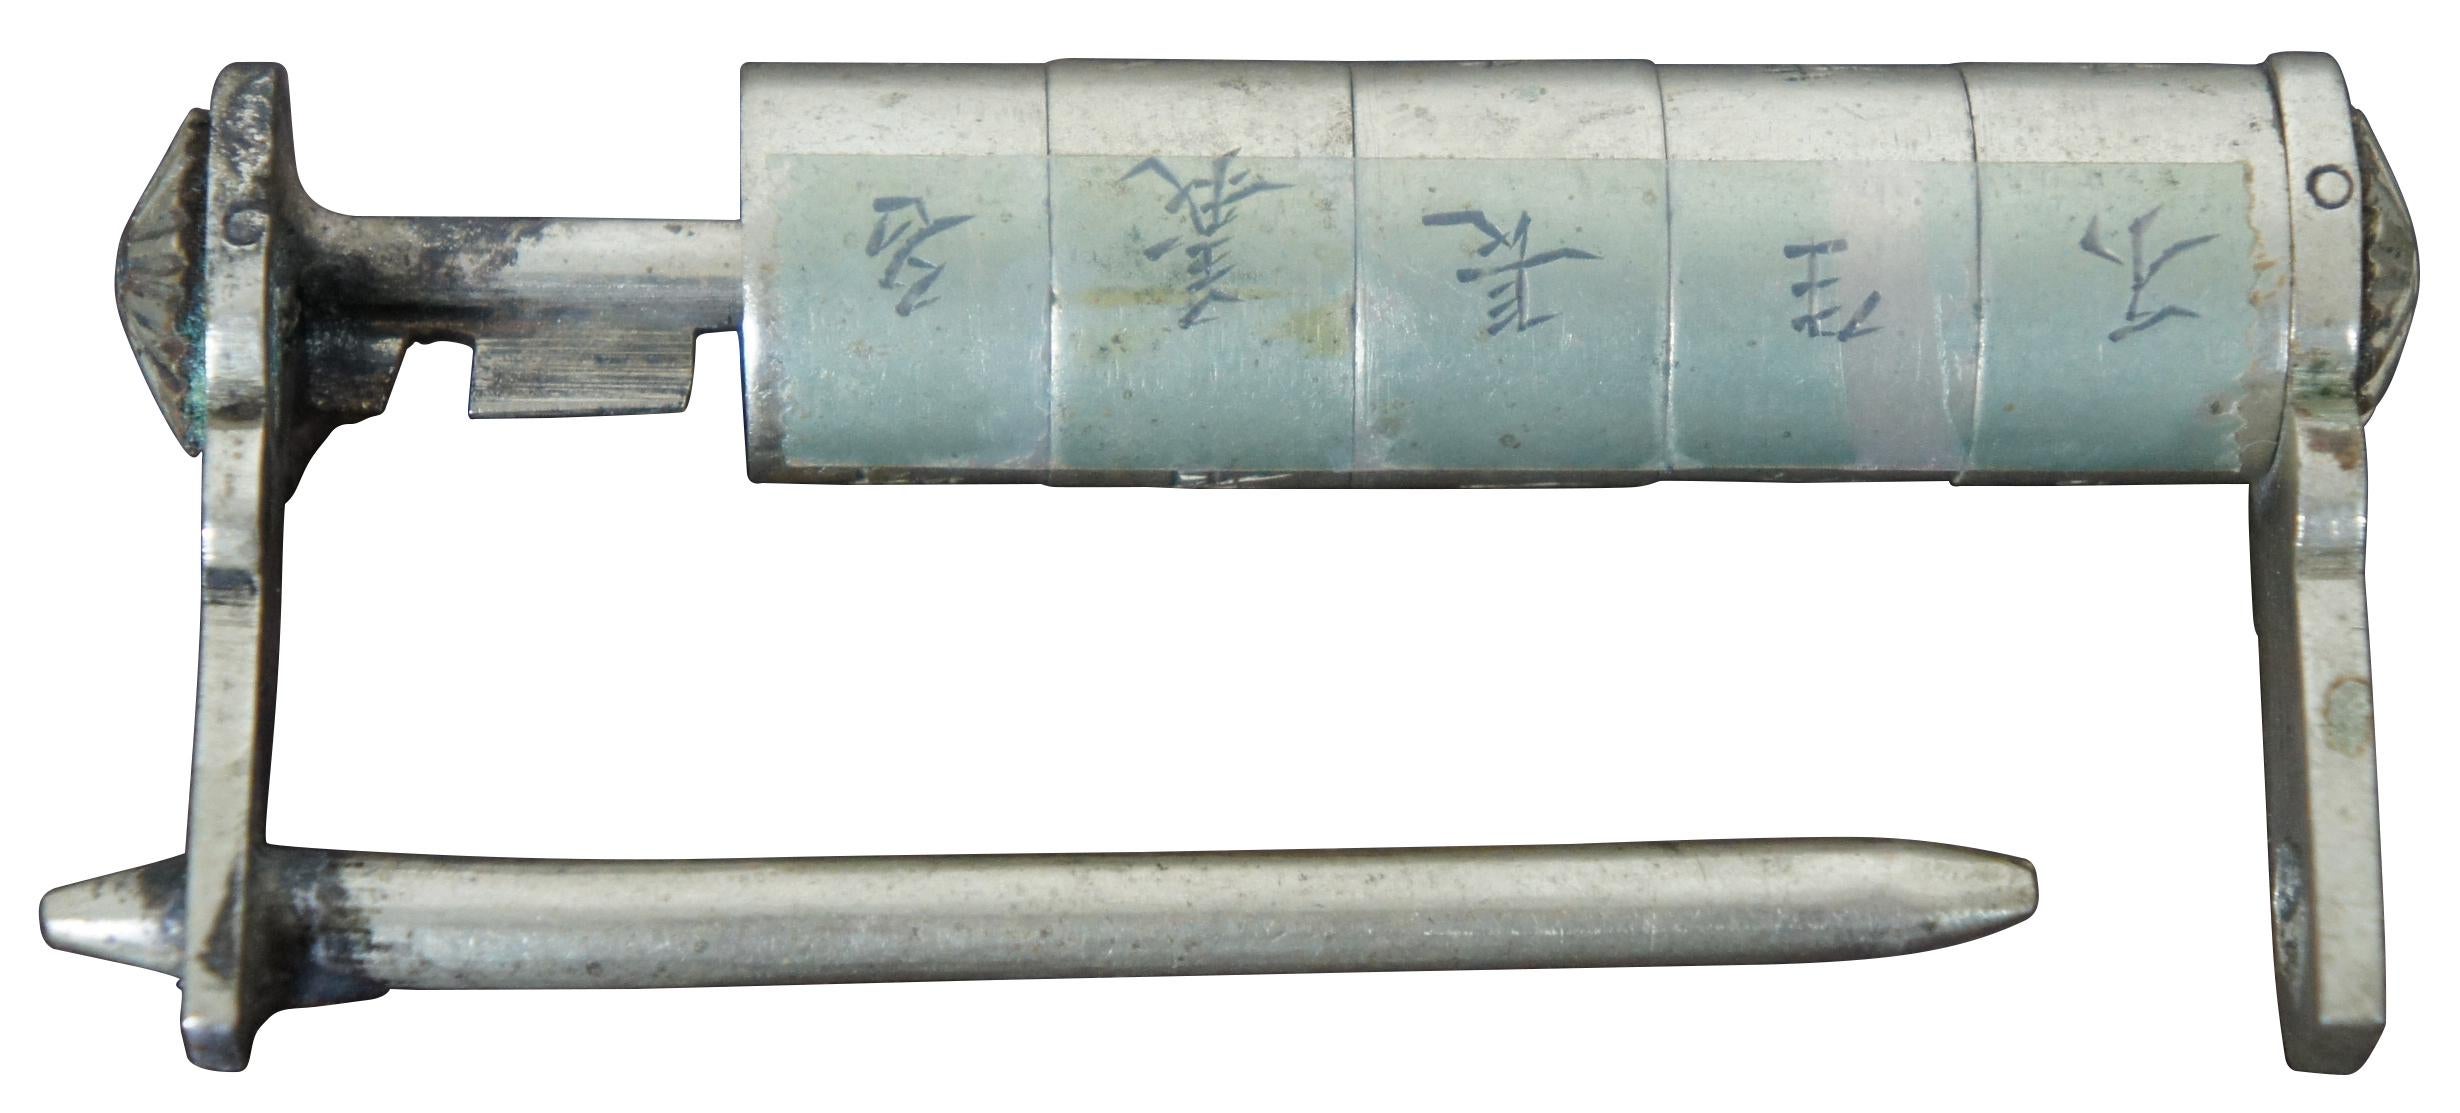 Antique metal cylinder poem padlock engraved with Chinese characters; currently taped in place at the solution/combination.
     